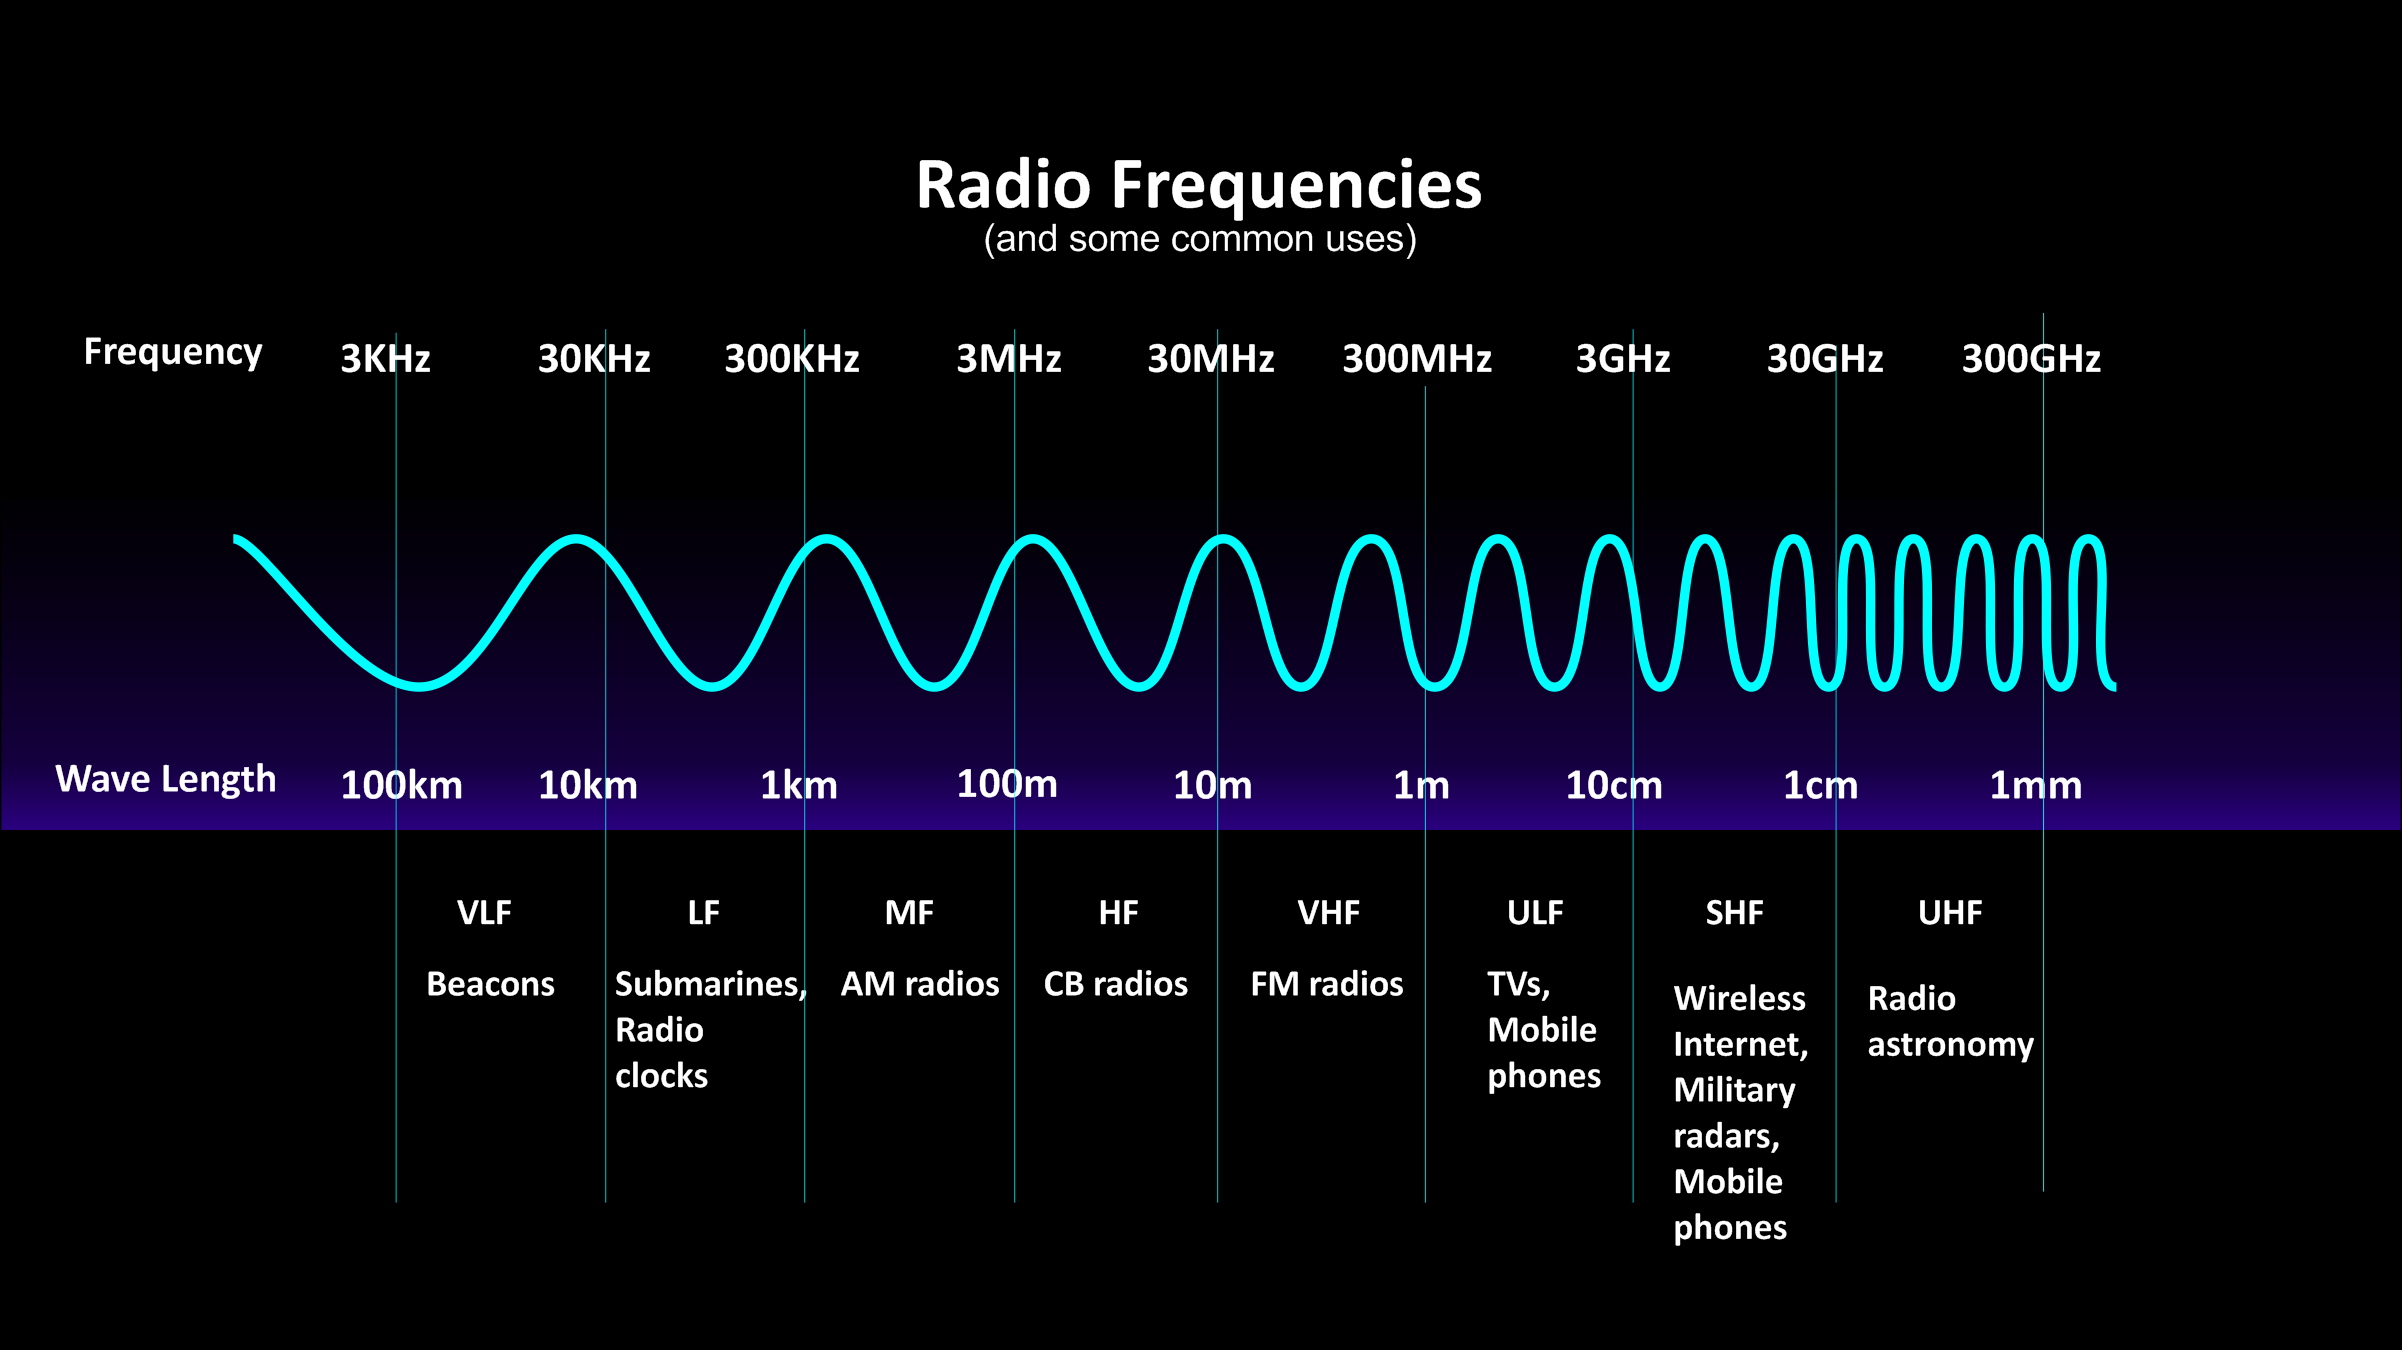 Multiverse 1 Radio Frequencies, and some common uses